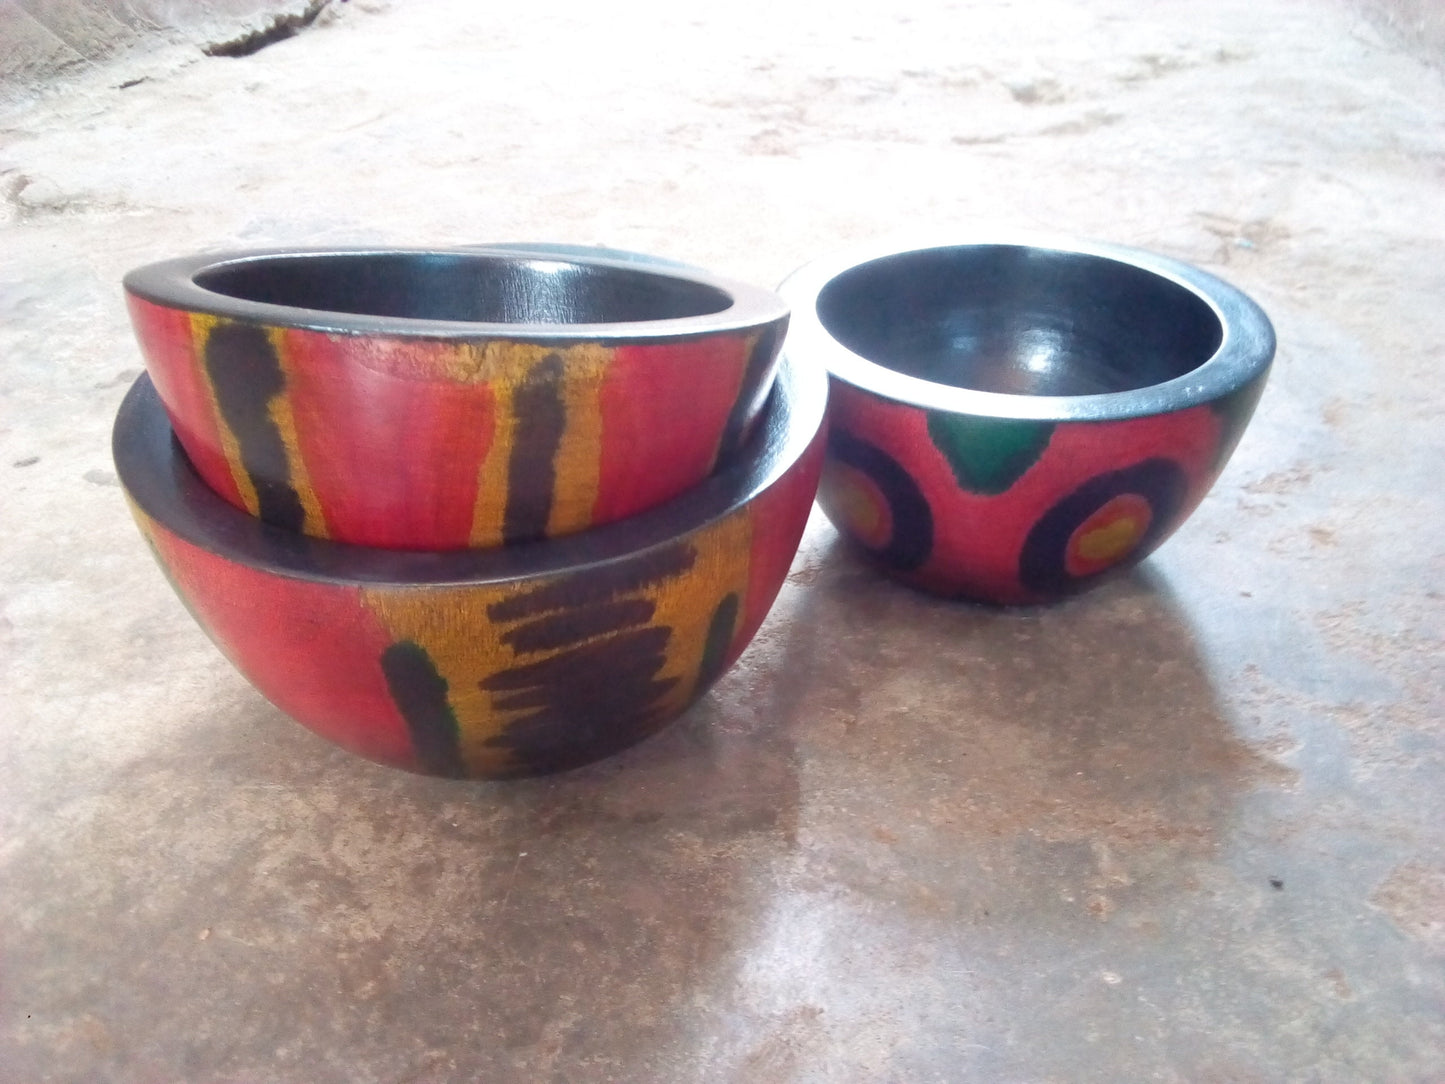 Set of 3 Handmade Wooden Bowls From Africa